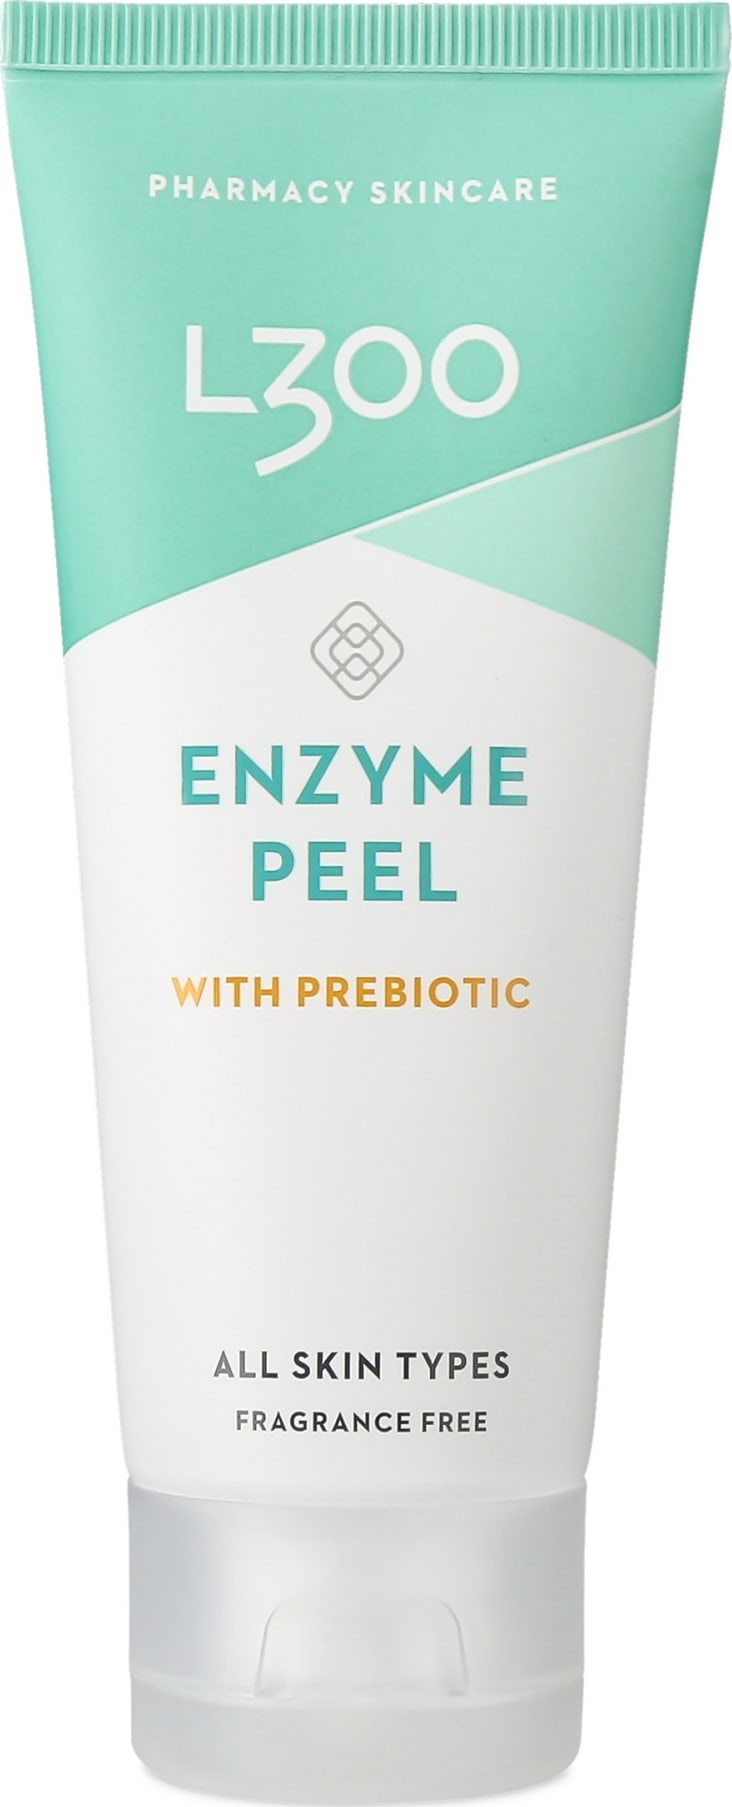 L300 Enzyme Peel With Prebiotic